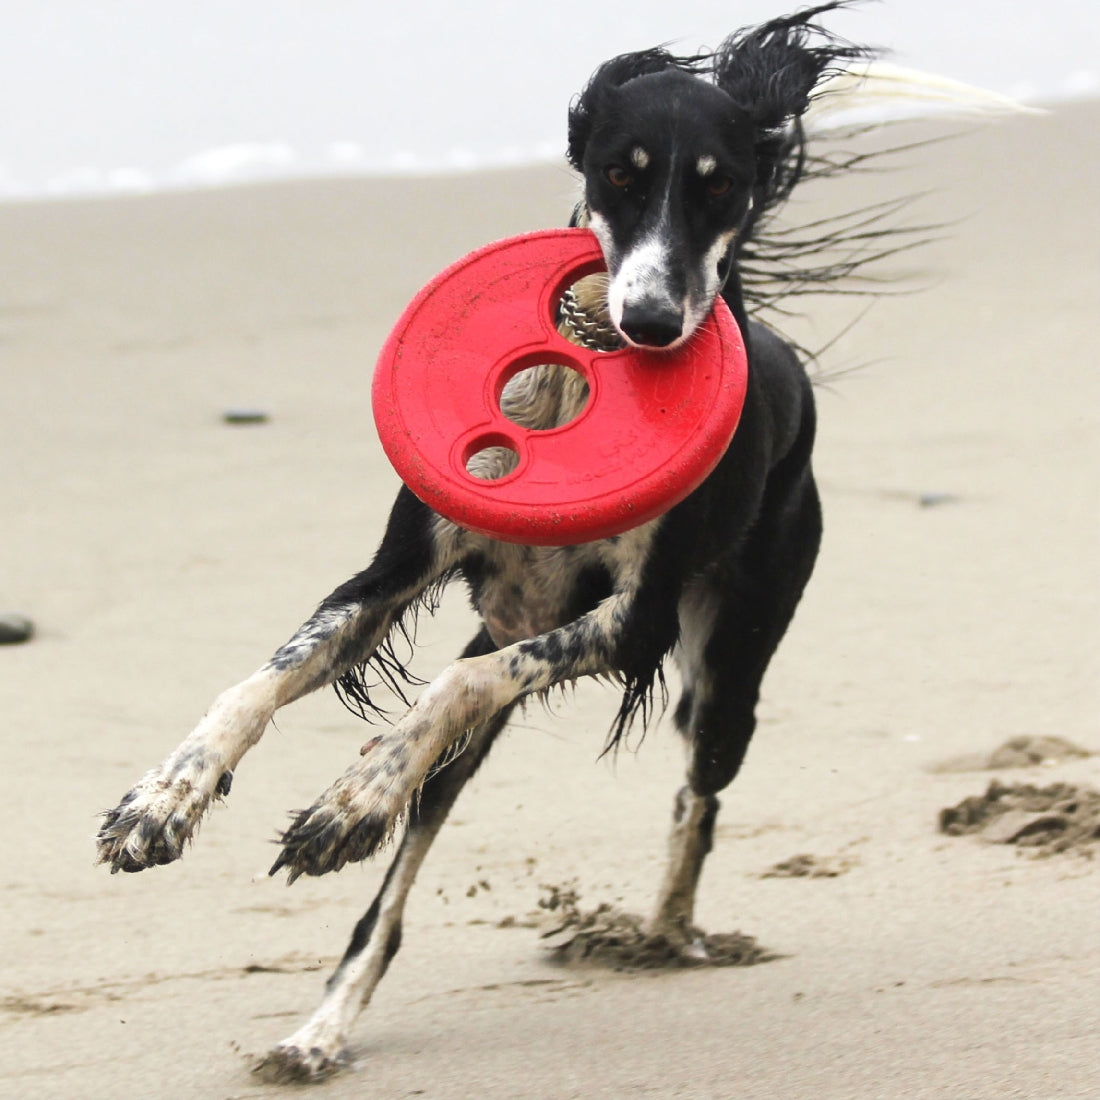 Dog carrying a red Rogz frisbee on the beach.